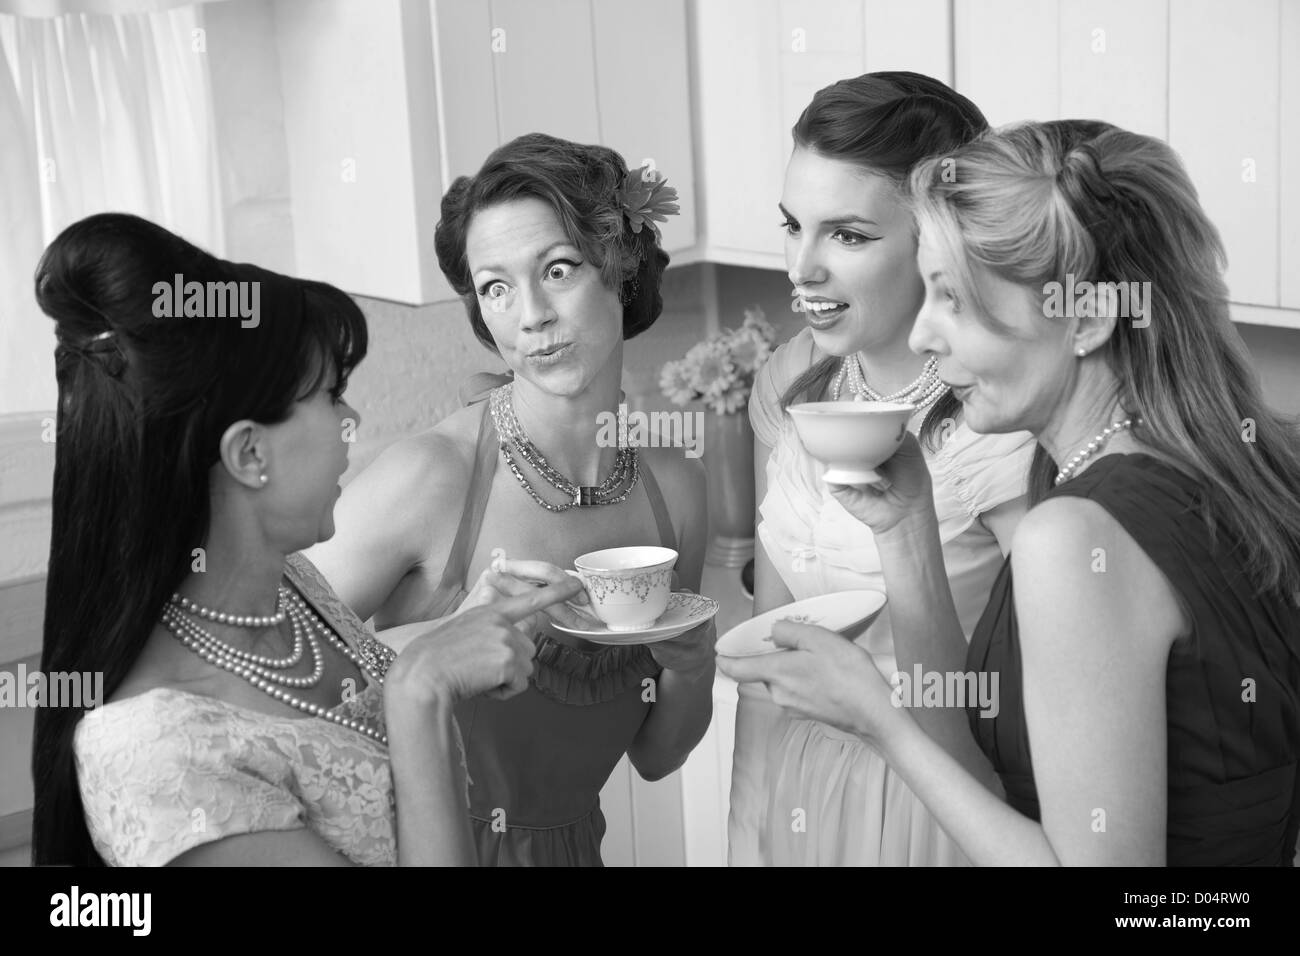 Four retro-styled women chit-chat over coffee in a kitchen Stock Photo